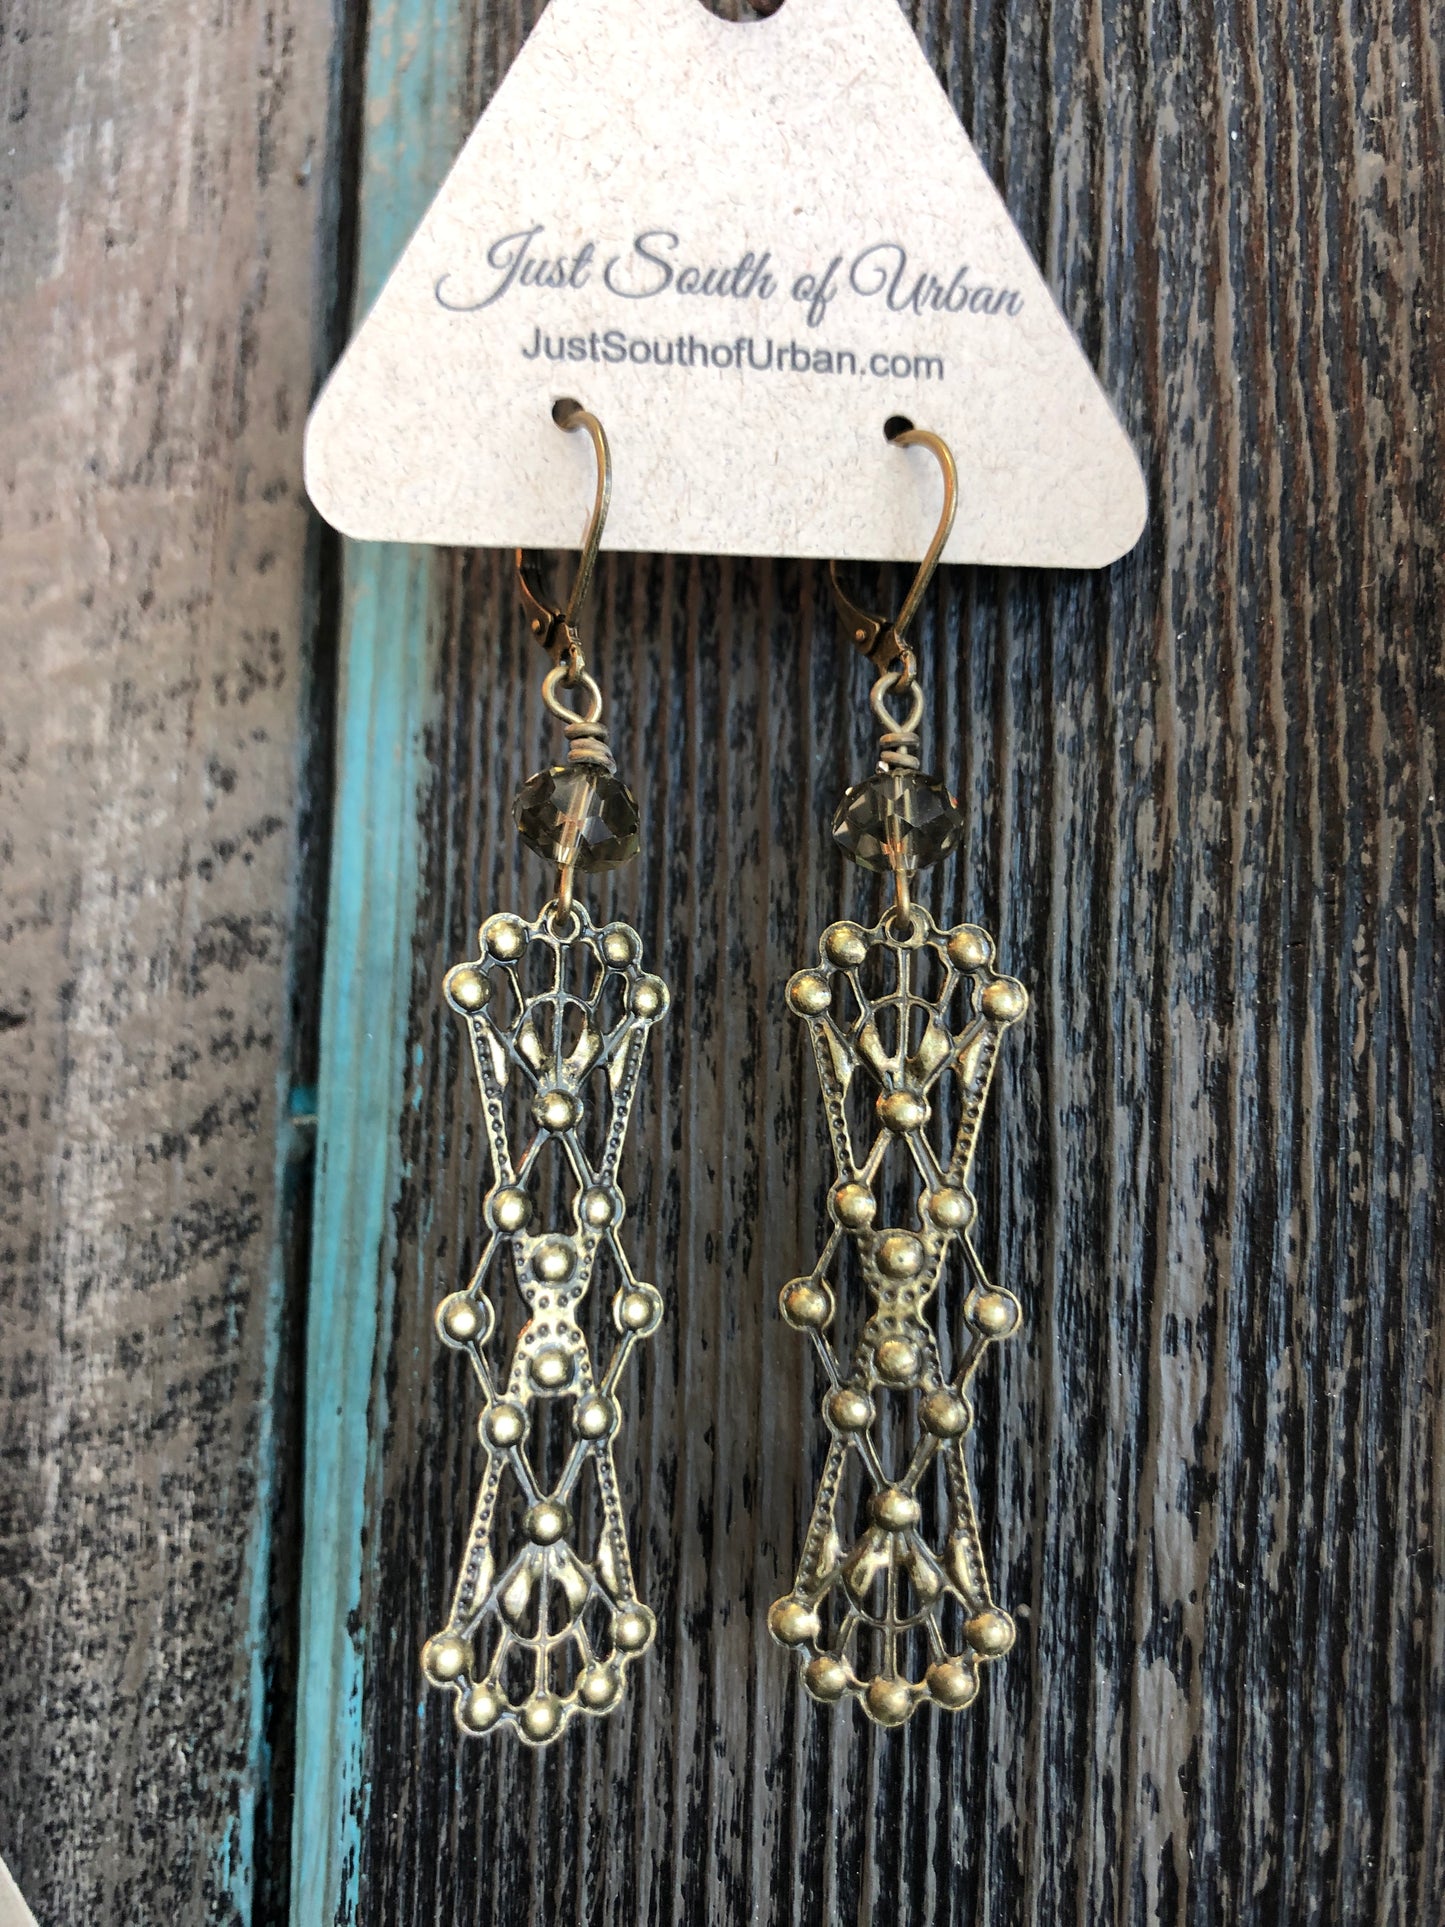 Vintage Filigree Dangle Earrings with Grey Faceted Crystal